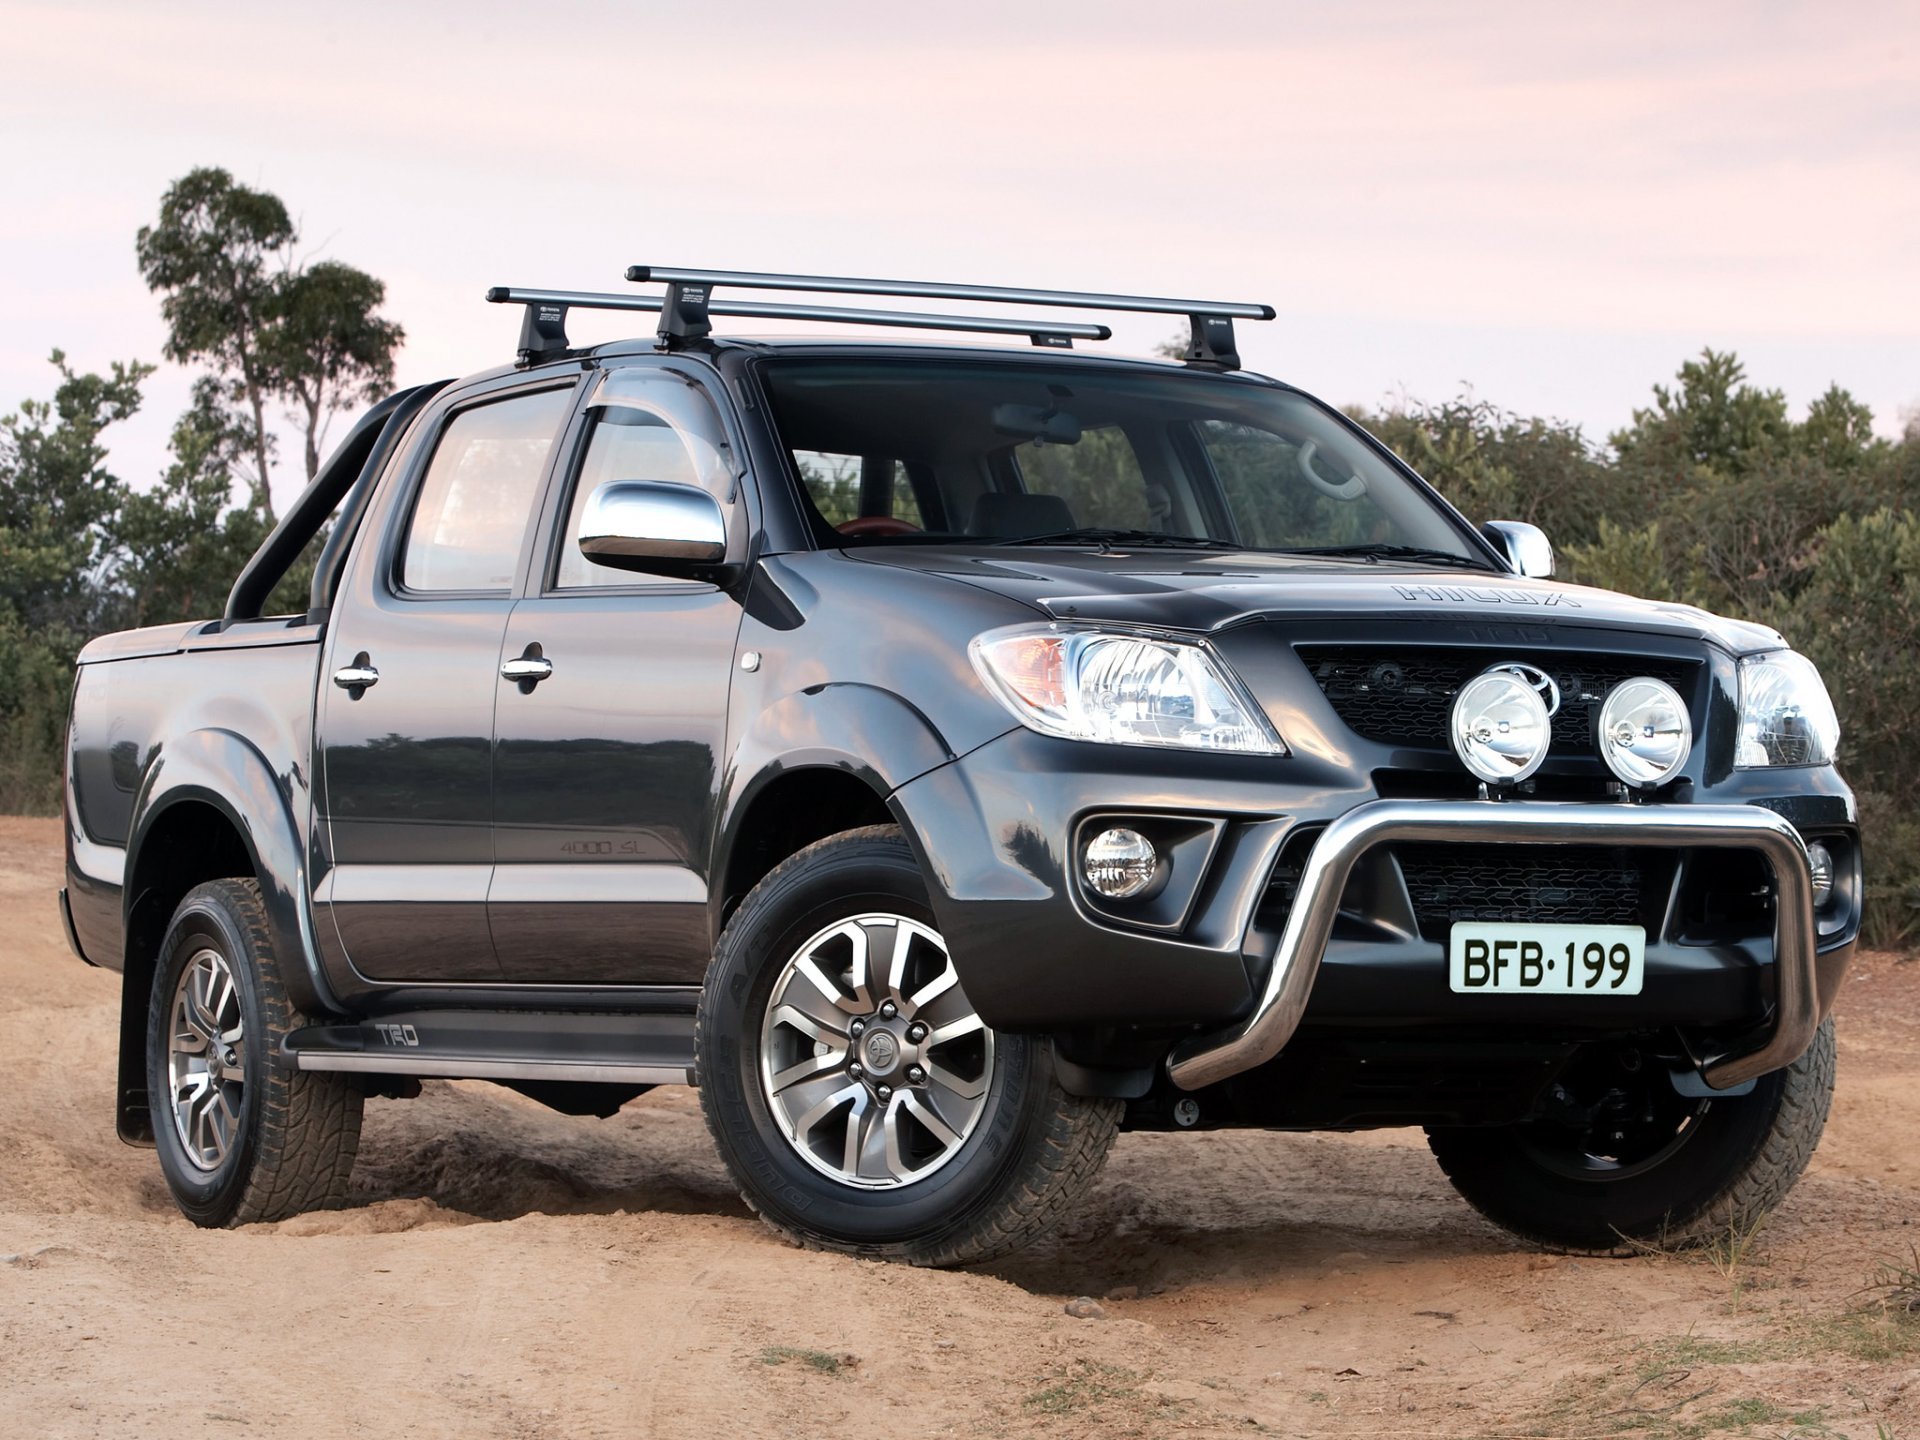 Toyota Hilux Trd Auto Car Wallpapers Japan Truck Suv - 2009 Toyota Hilux Trd , HD Wallpaper & Backgrounds